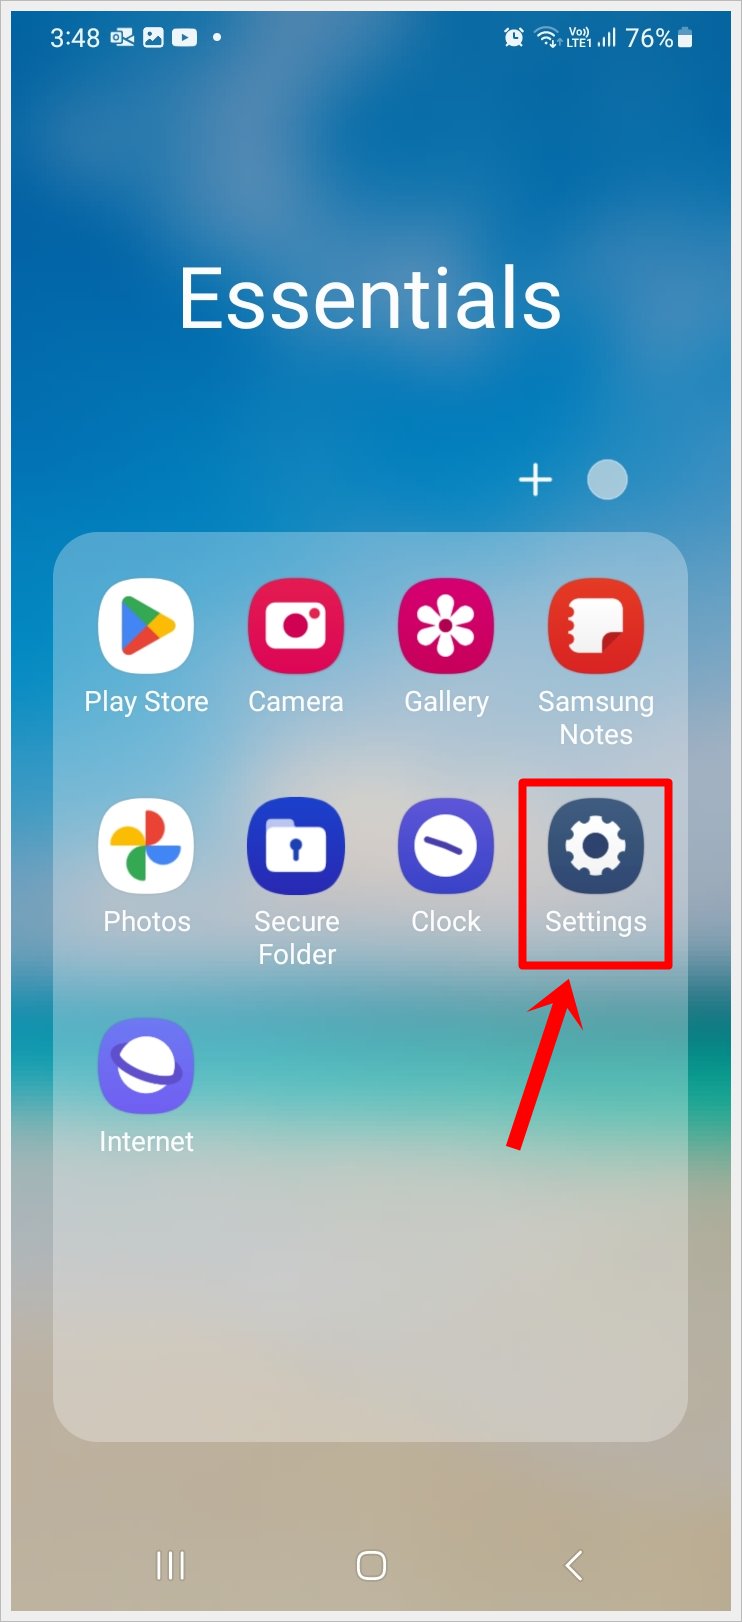 This is a screenshot from a Samsung Galaxy phone with the 'Settings' app icon highlighted.